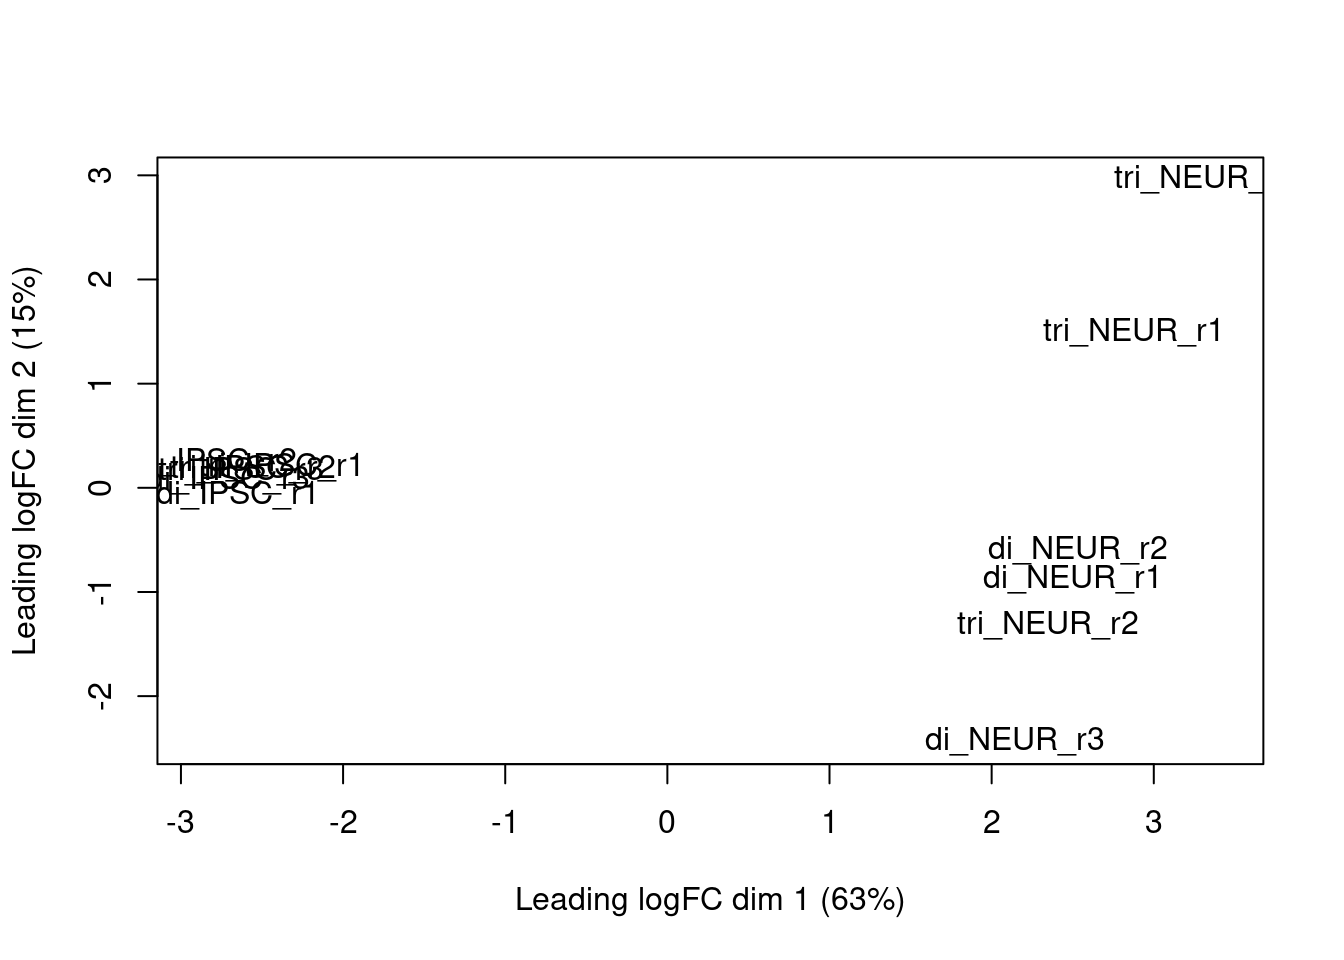 edgeR MDS plot based on the calculated log2 fold changes